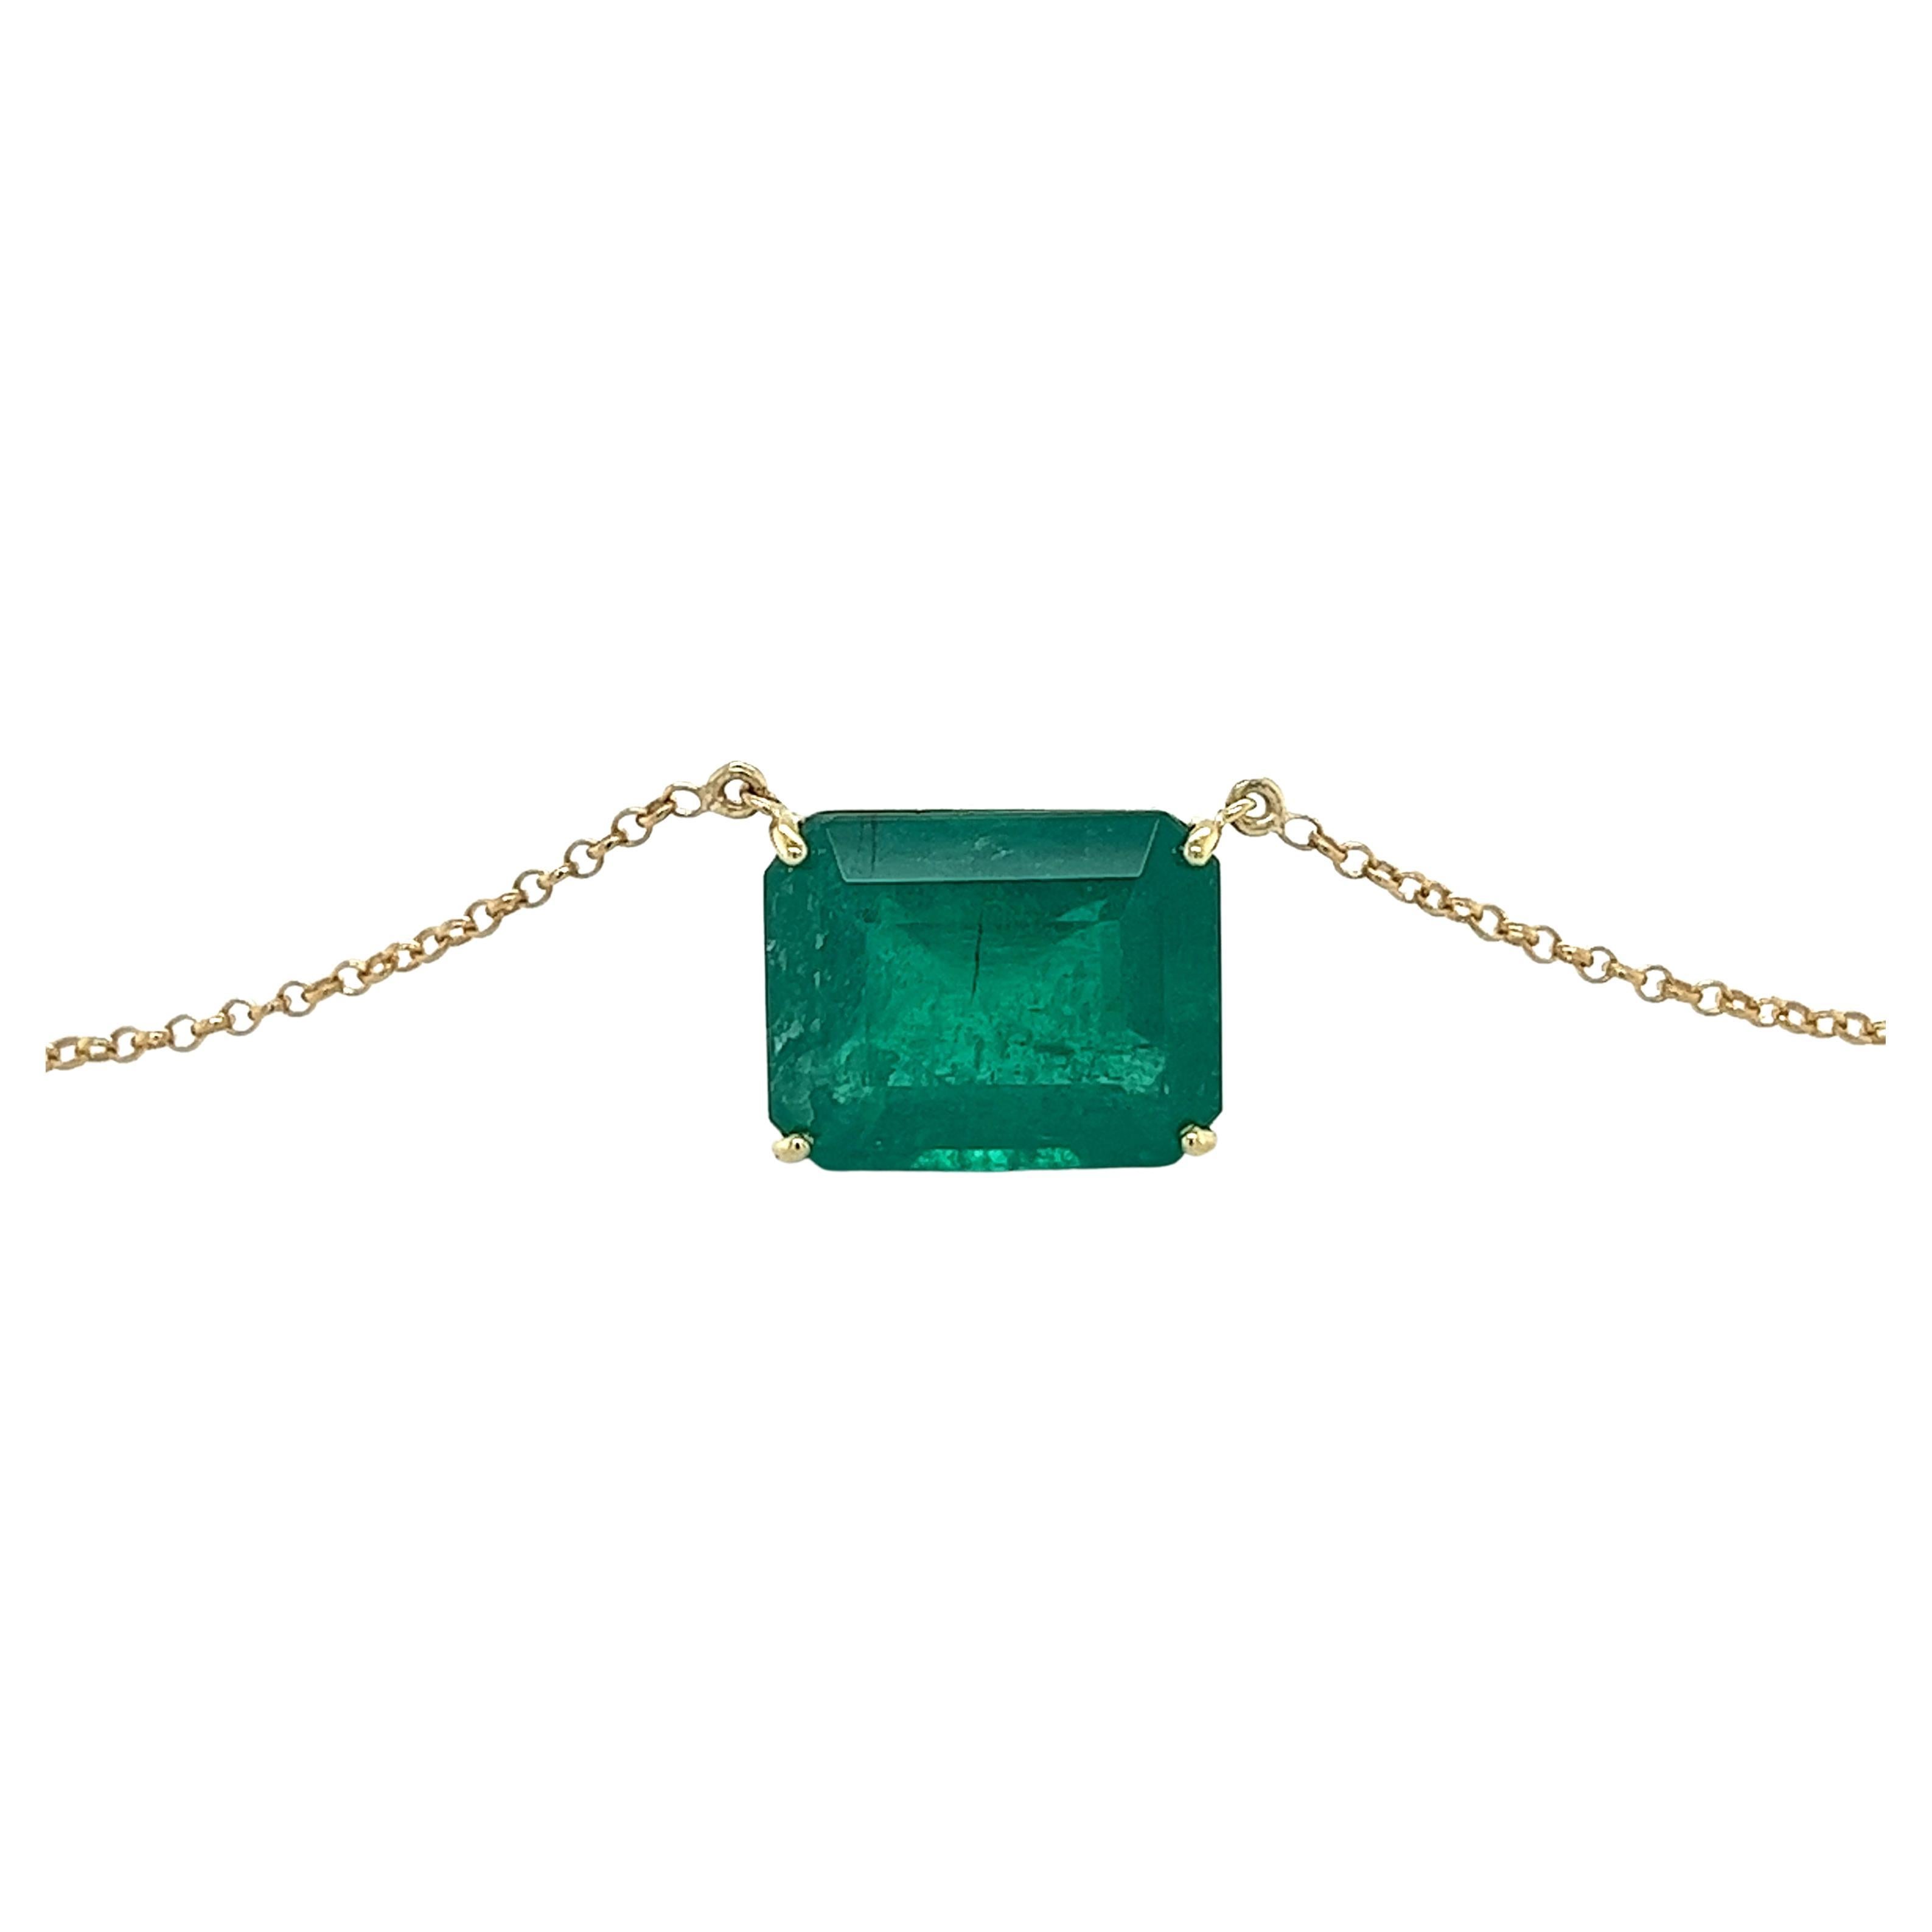 8.67 Carat Vivid Green Colombian Emerald Solitaire Pendant Necklace in 18K Gold For Sale